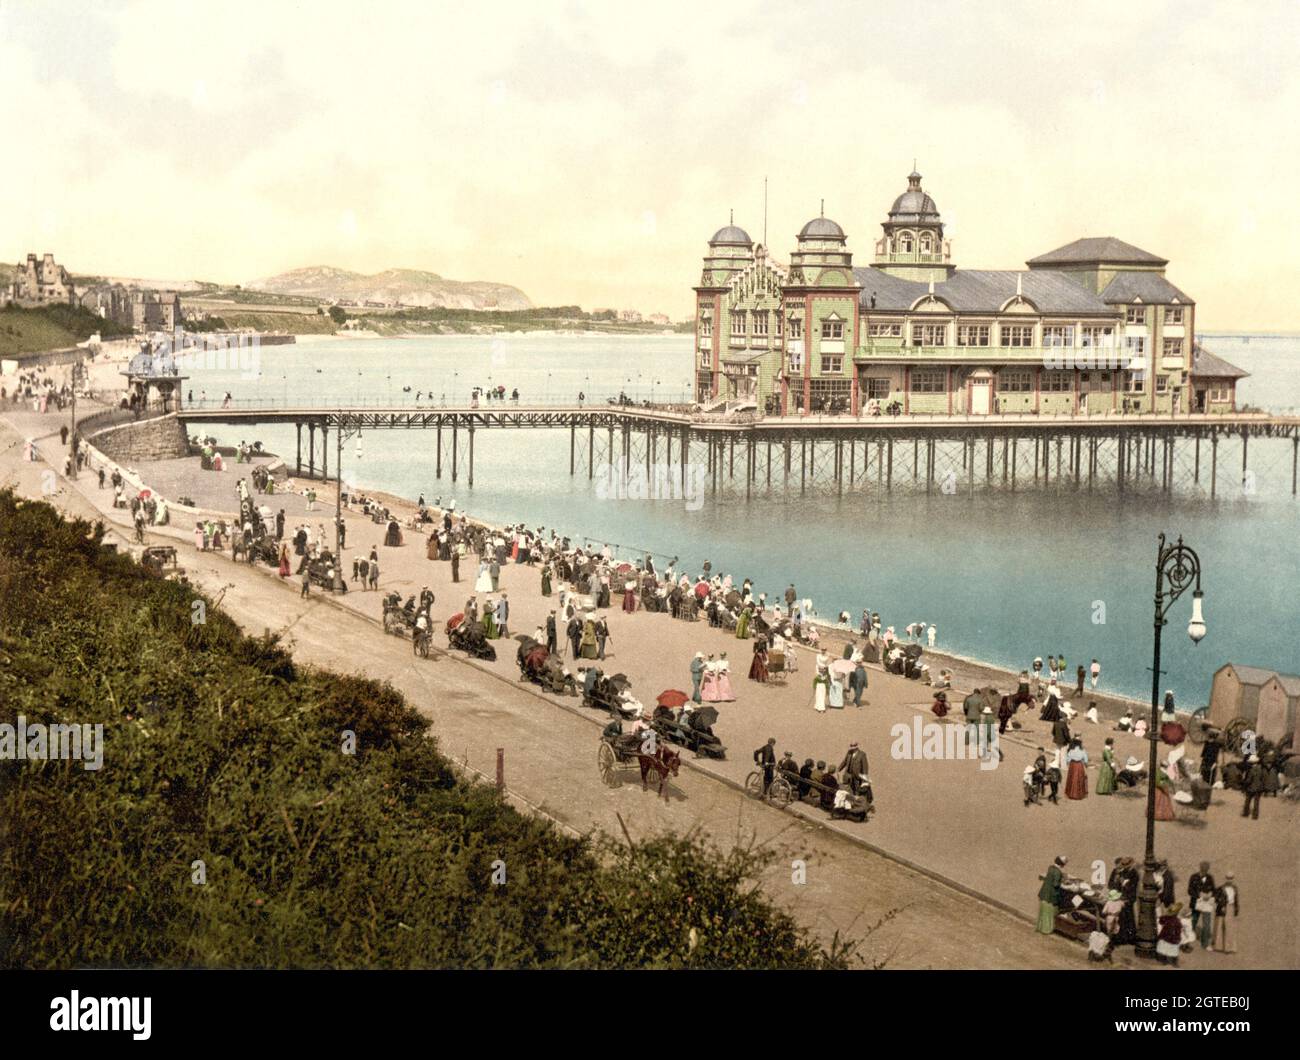 Vintage colour photo circa 1900 of the original Colwyn Bay Victoria Pier and Pavilion on the North Wales coast. The pier was opened on 1 June 1900 and the pavilion was burned down in 1922 though the original cast iron structure survives to the present day. Stock Photo